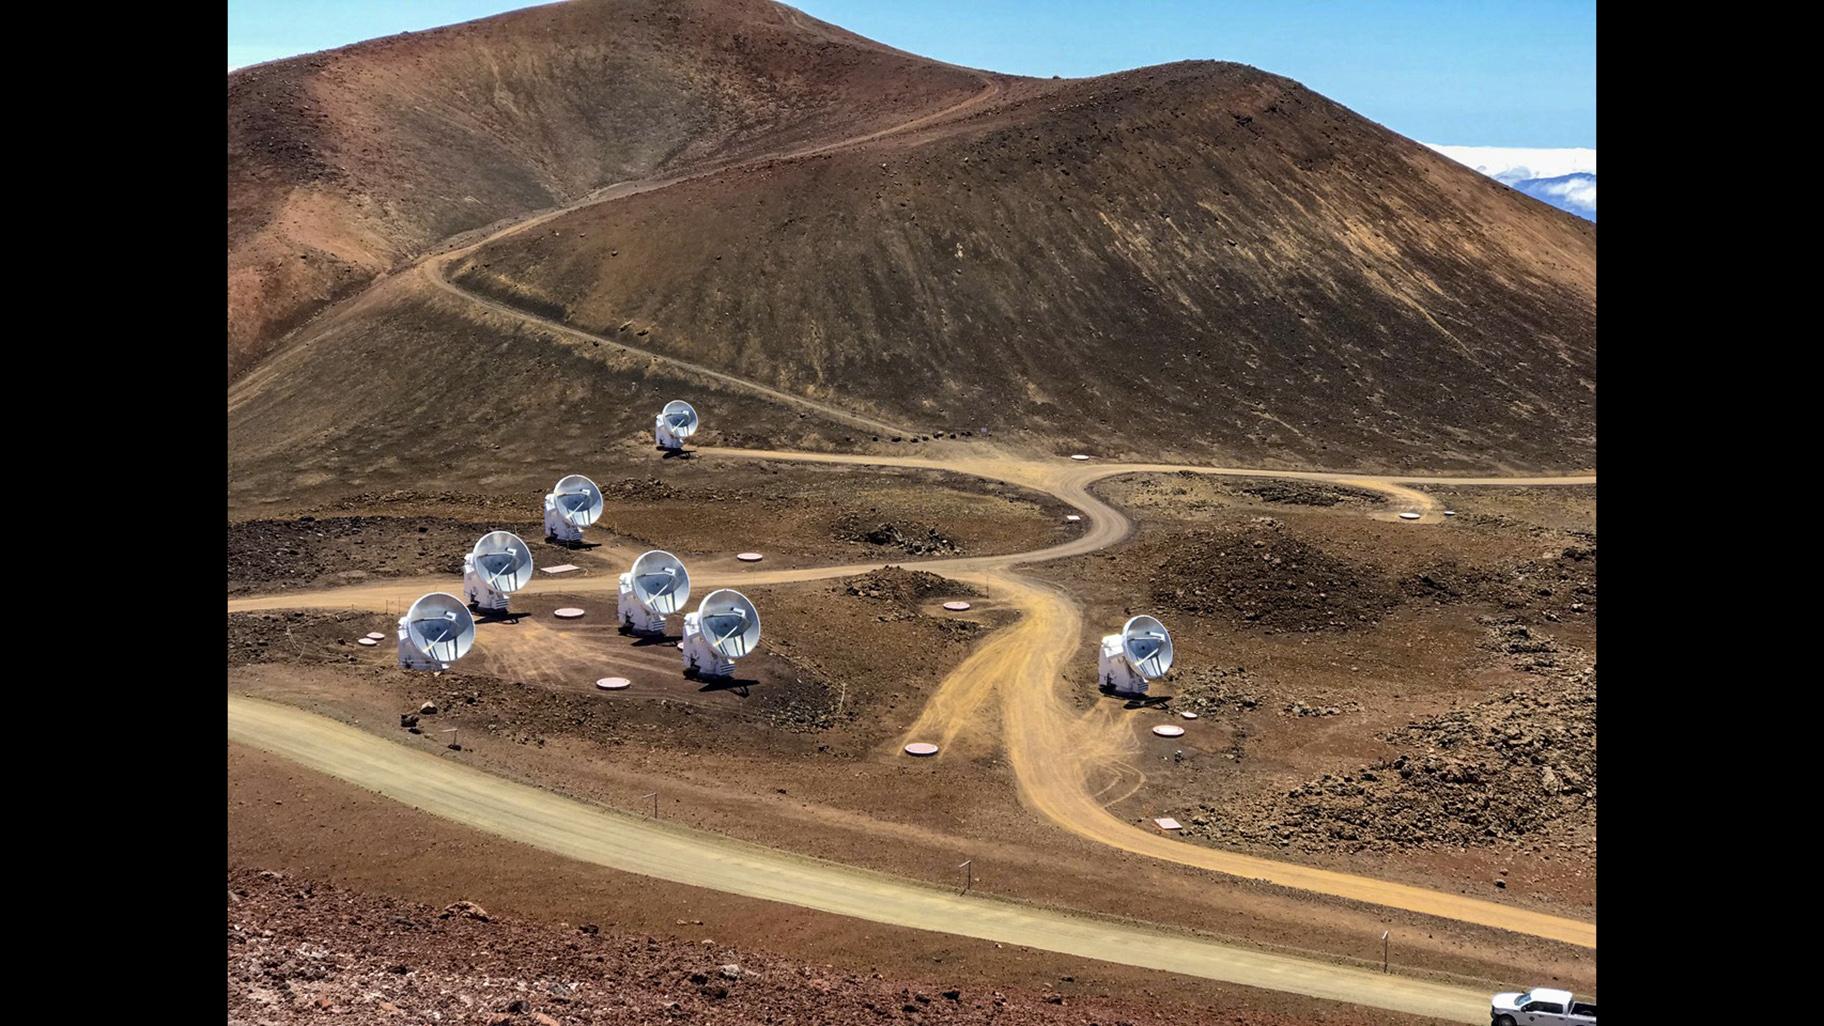 This April 4, 2019, photo, provided by Maunakea Observatories shows the Submillimeter Array, part of the Event Horizon Telescope network on the summit of Mauna Kea, Hawaii. Scientists on Wednesday, April 10, revealed the first image ever made of a black hole using these telescopes. (Maunakea Observatories via AP)